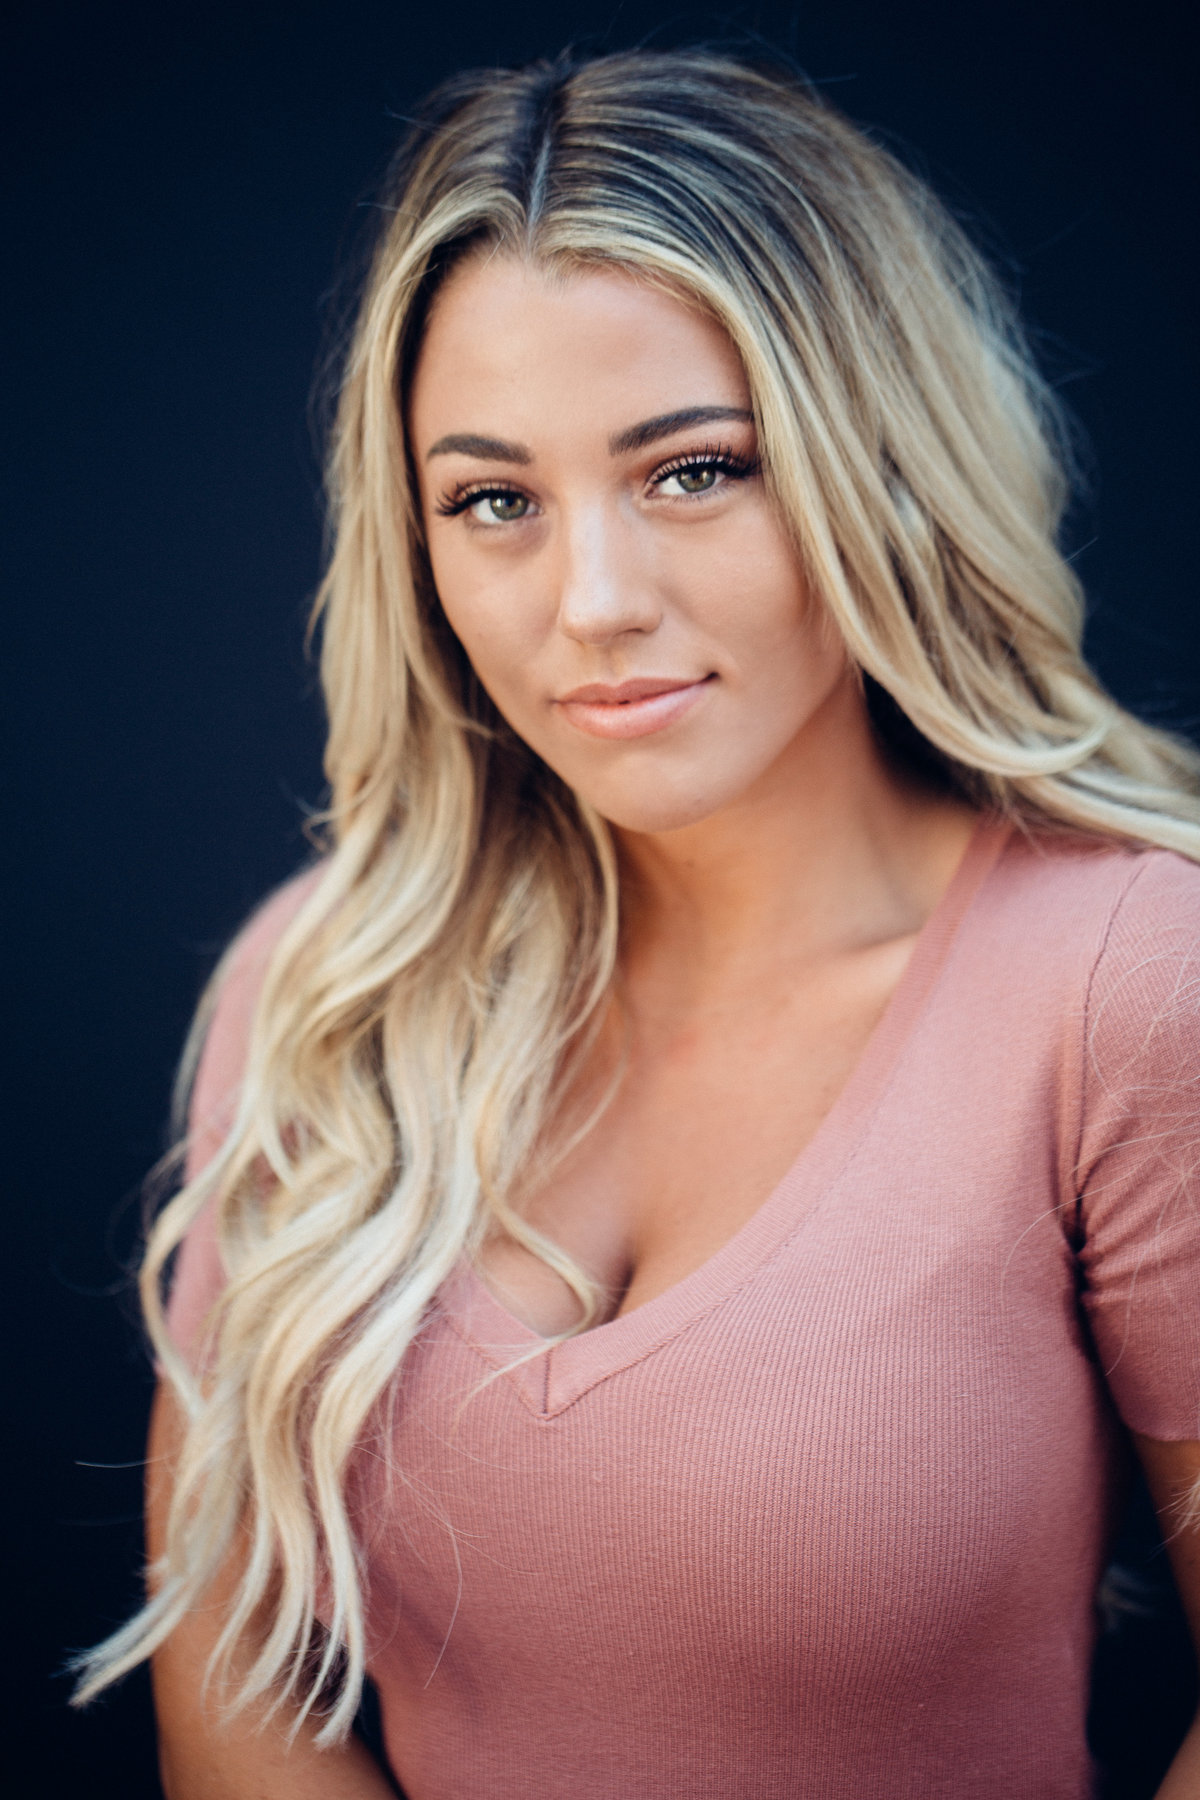 Headshot Photograph Of Young Woman In Pink V-Neck Shirt Los Angeles